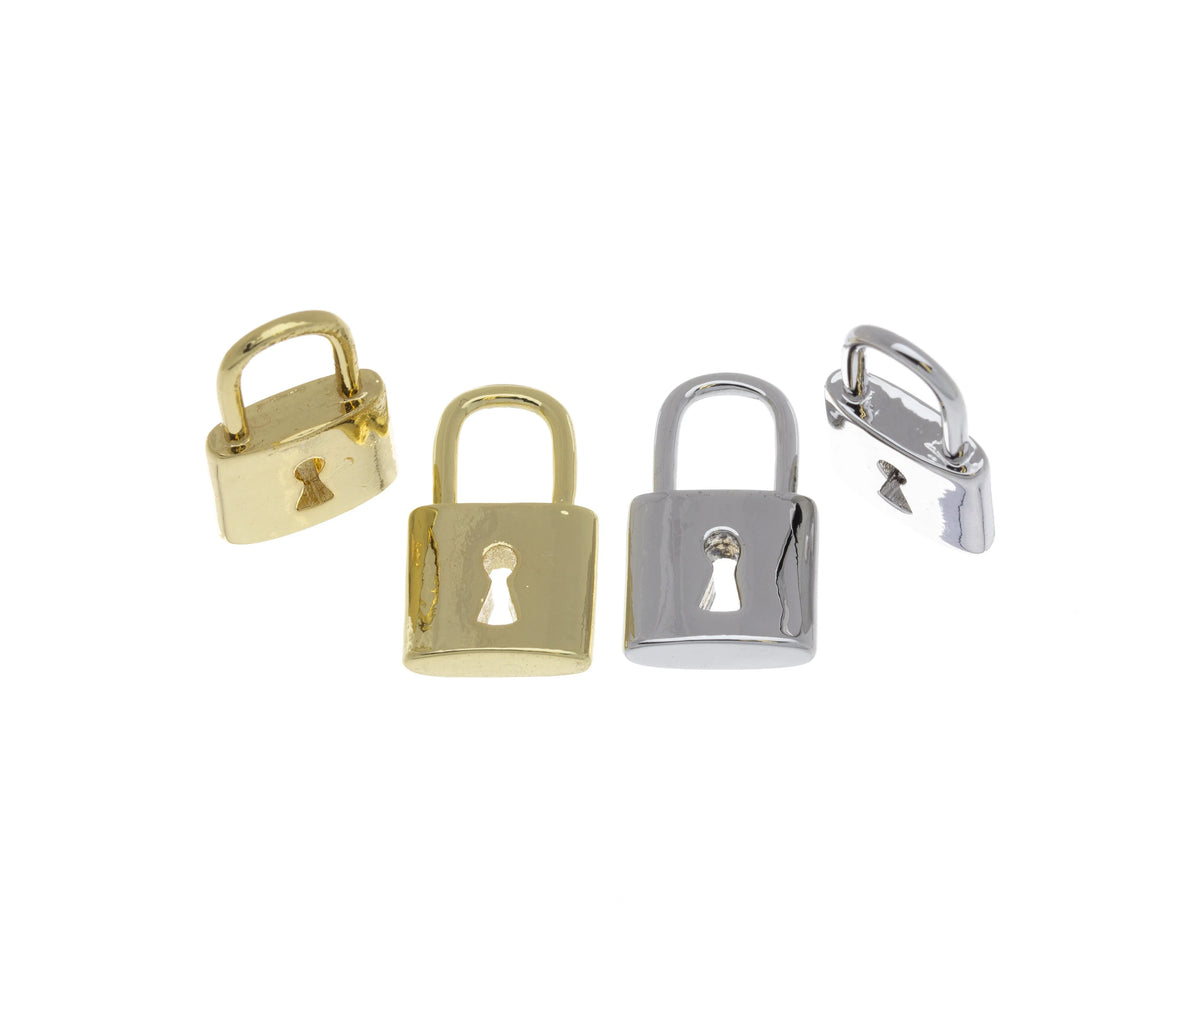 Gold Padlock Charm,Silver Lock pendant, padlock For Necklace,1 pc or 10 pcs, WHOLESALE,CPG437-CPS437